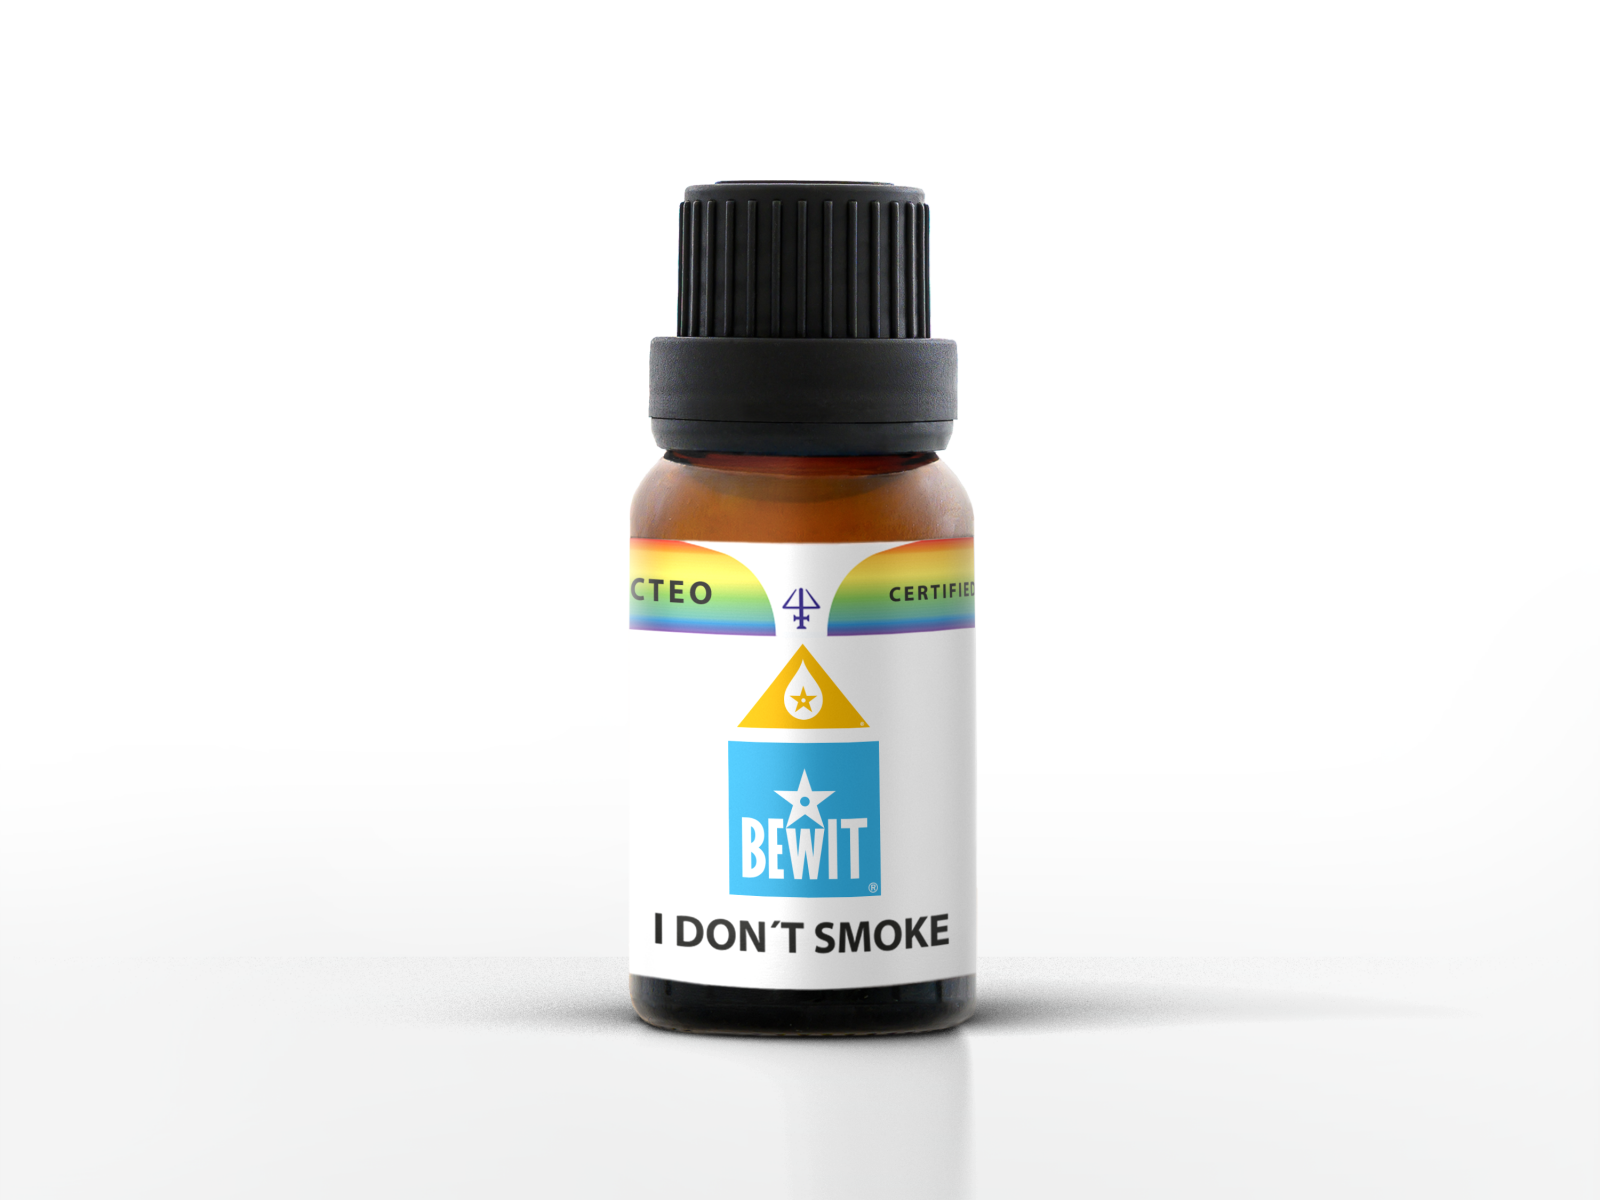 BEWIT I DON'T SMOKE - Blend of essential oils